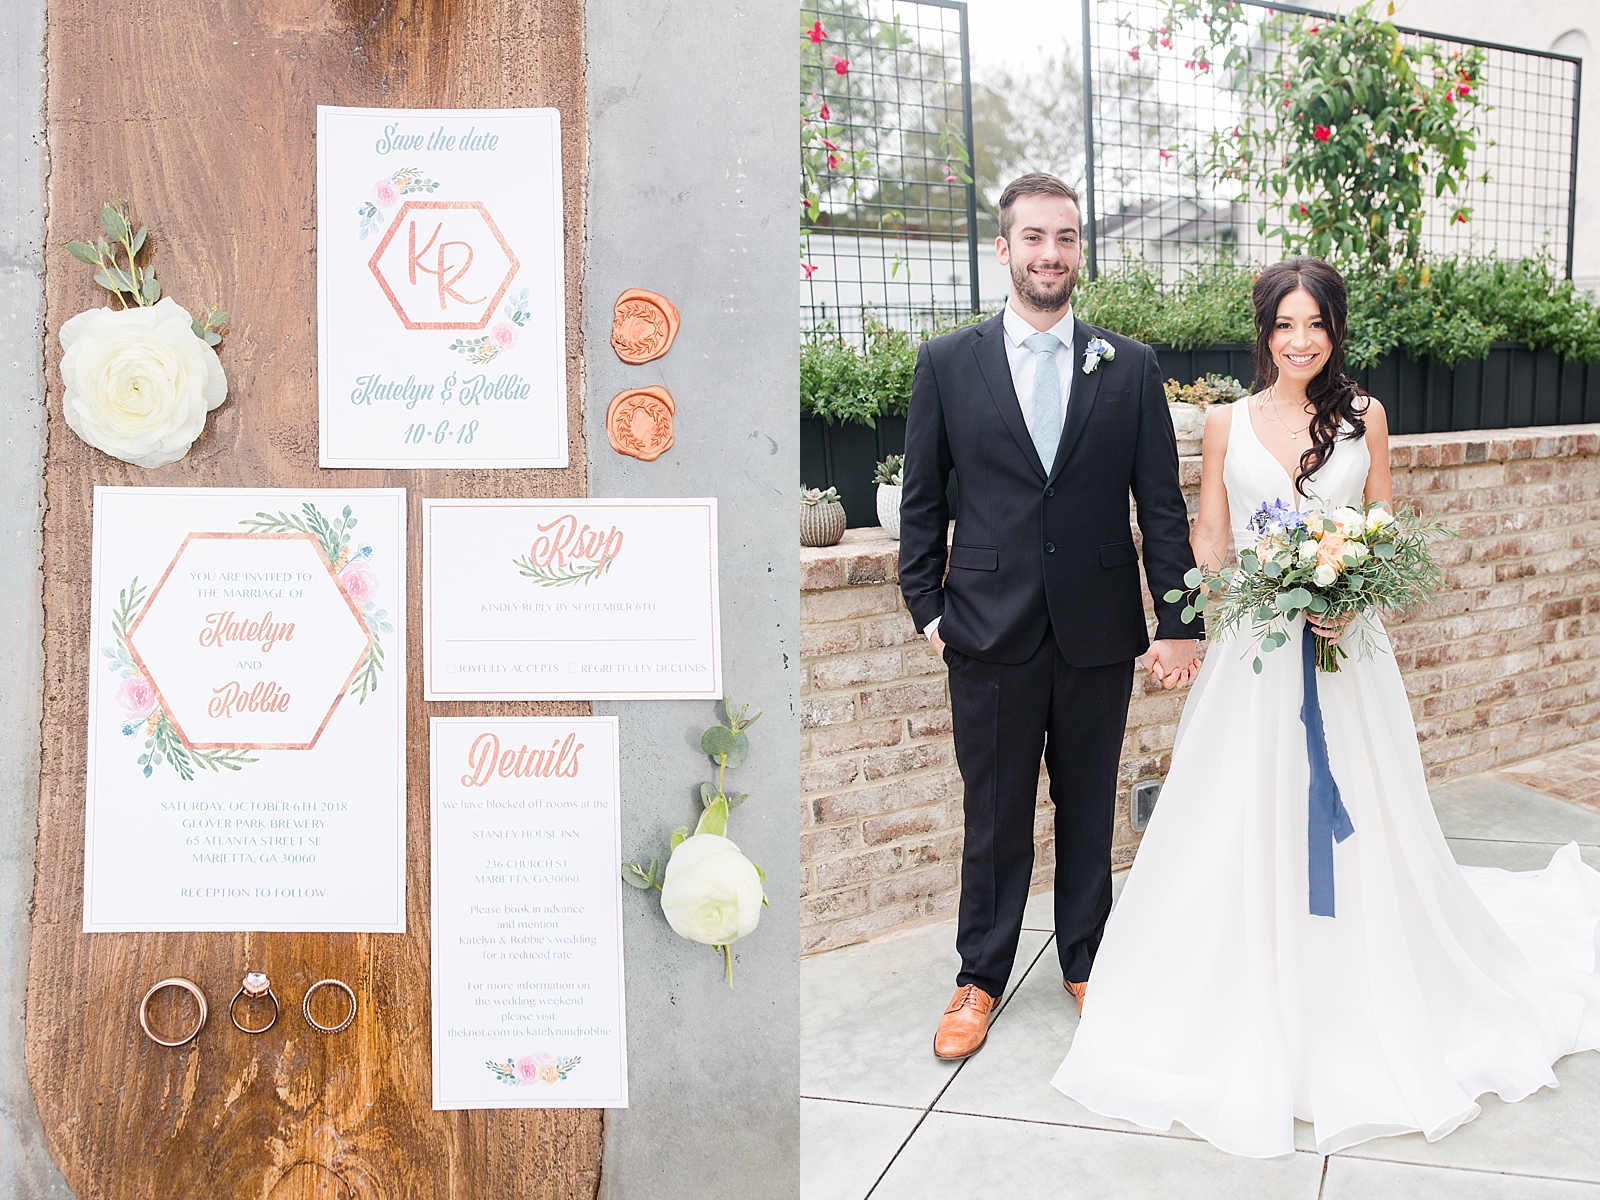 Glover Park Brewery Wedding Invitation Suite and Bride and groom in front of trellis Photos